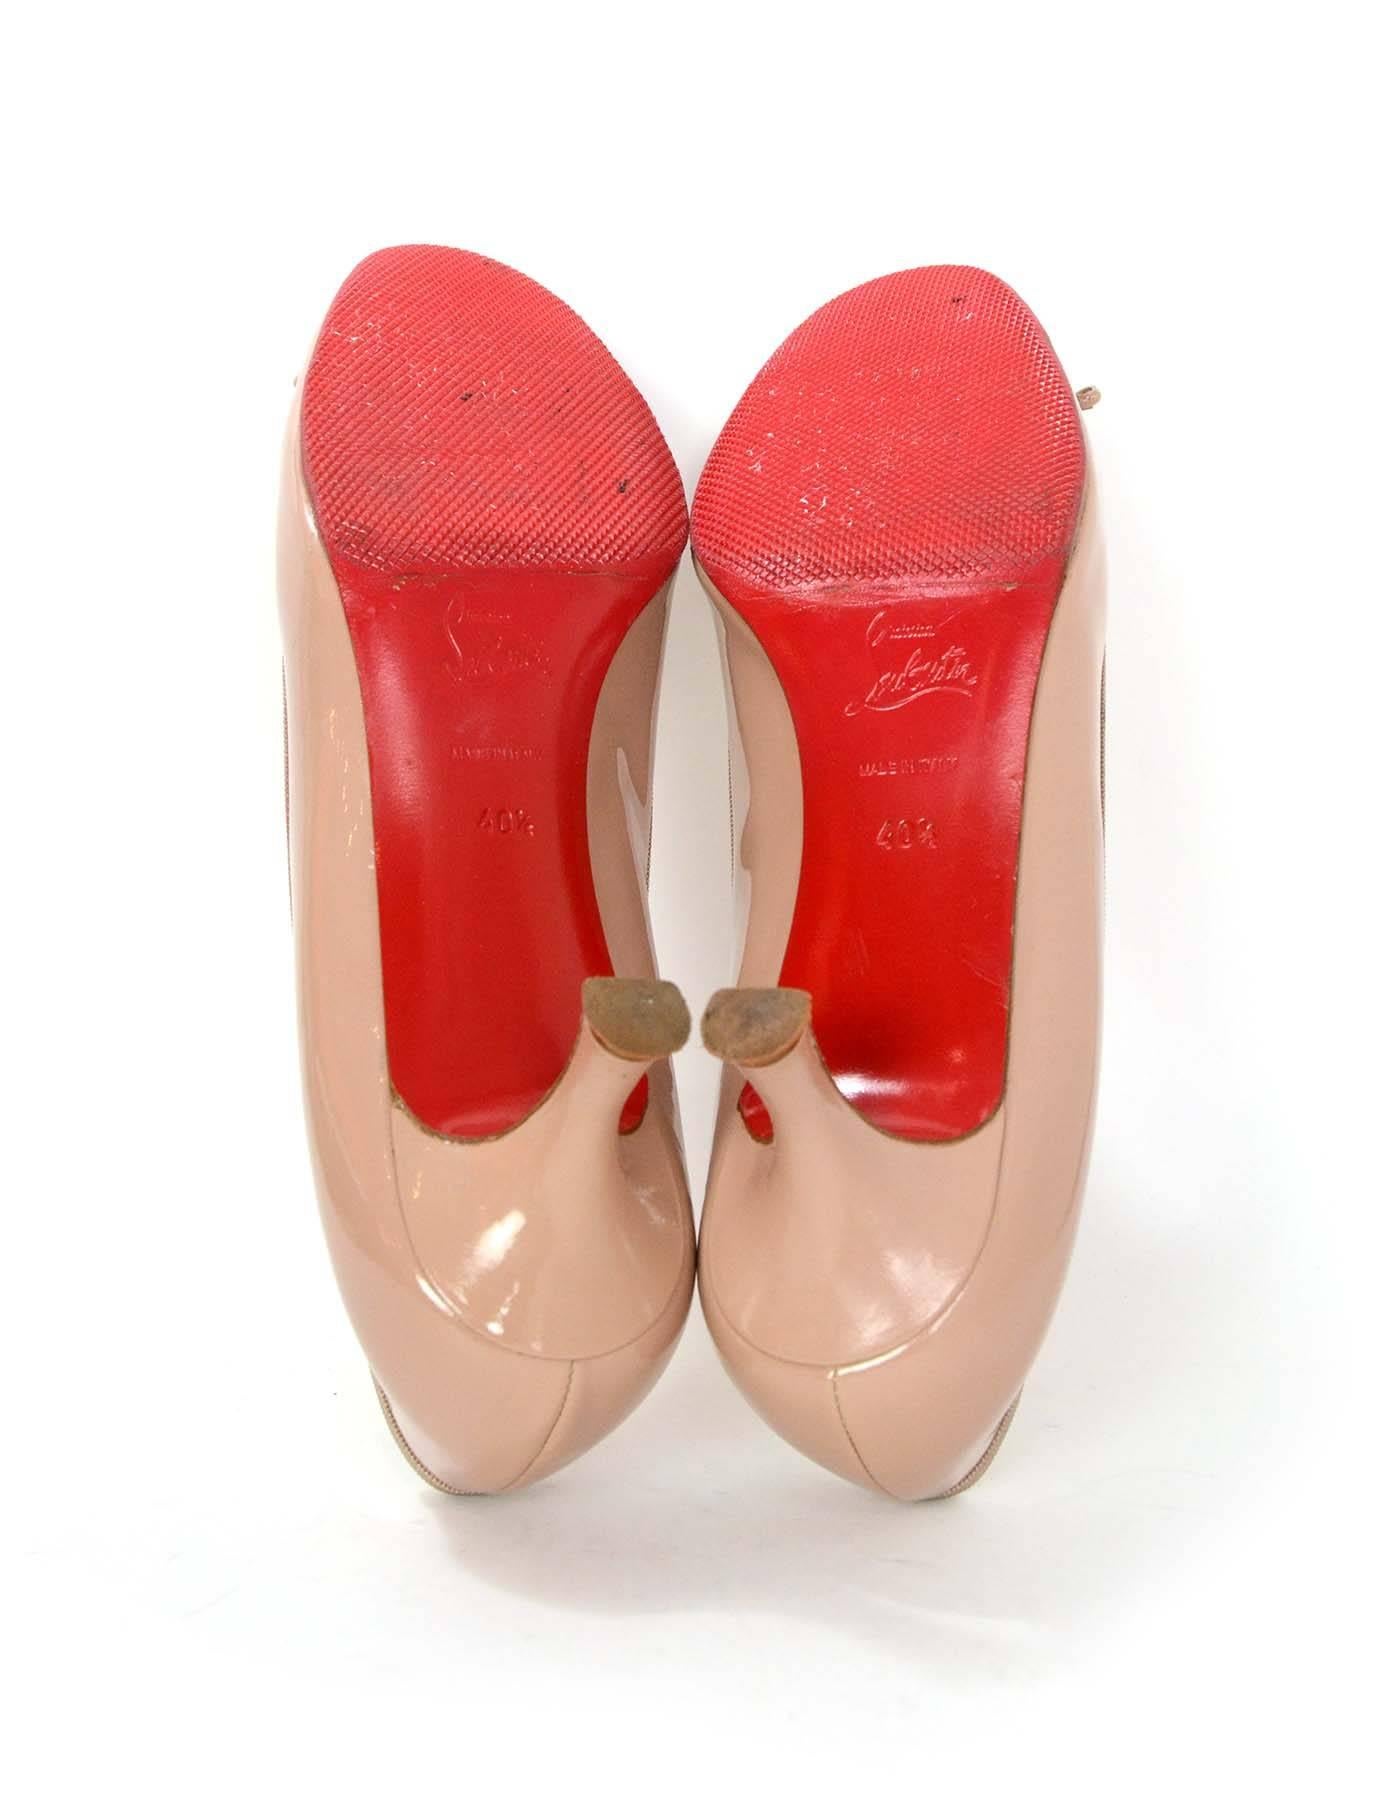 Christian Louboutin Nude Patent Kitten Heel Pumps sz 40.5 In Excellent Condition In New York, NY